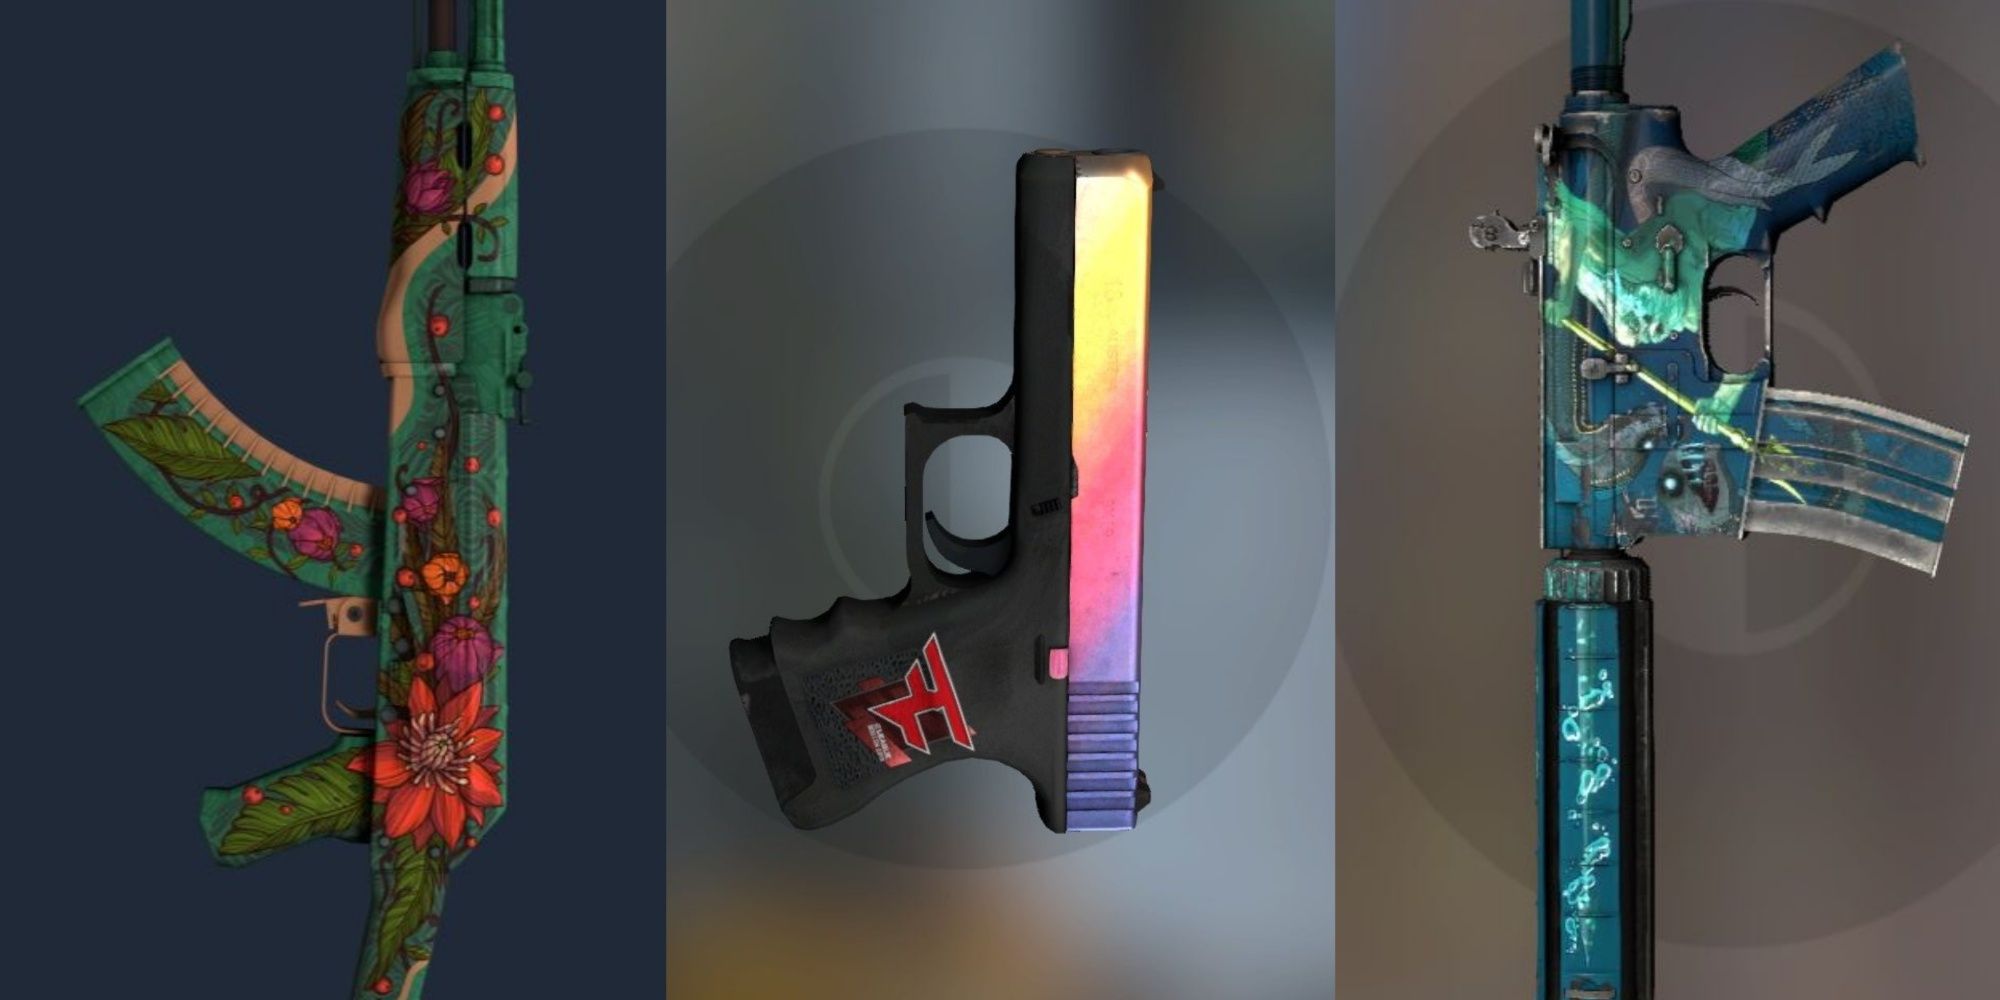 Extremely Rare CS:GO Knife Might Be The Most Expensive Skin In